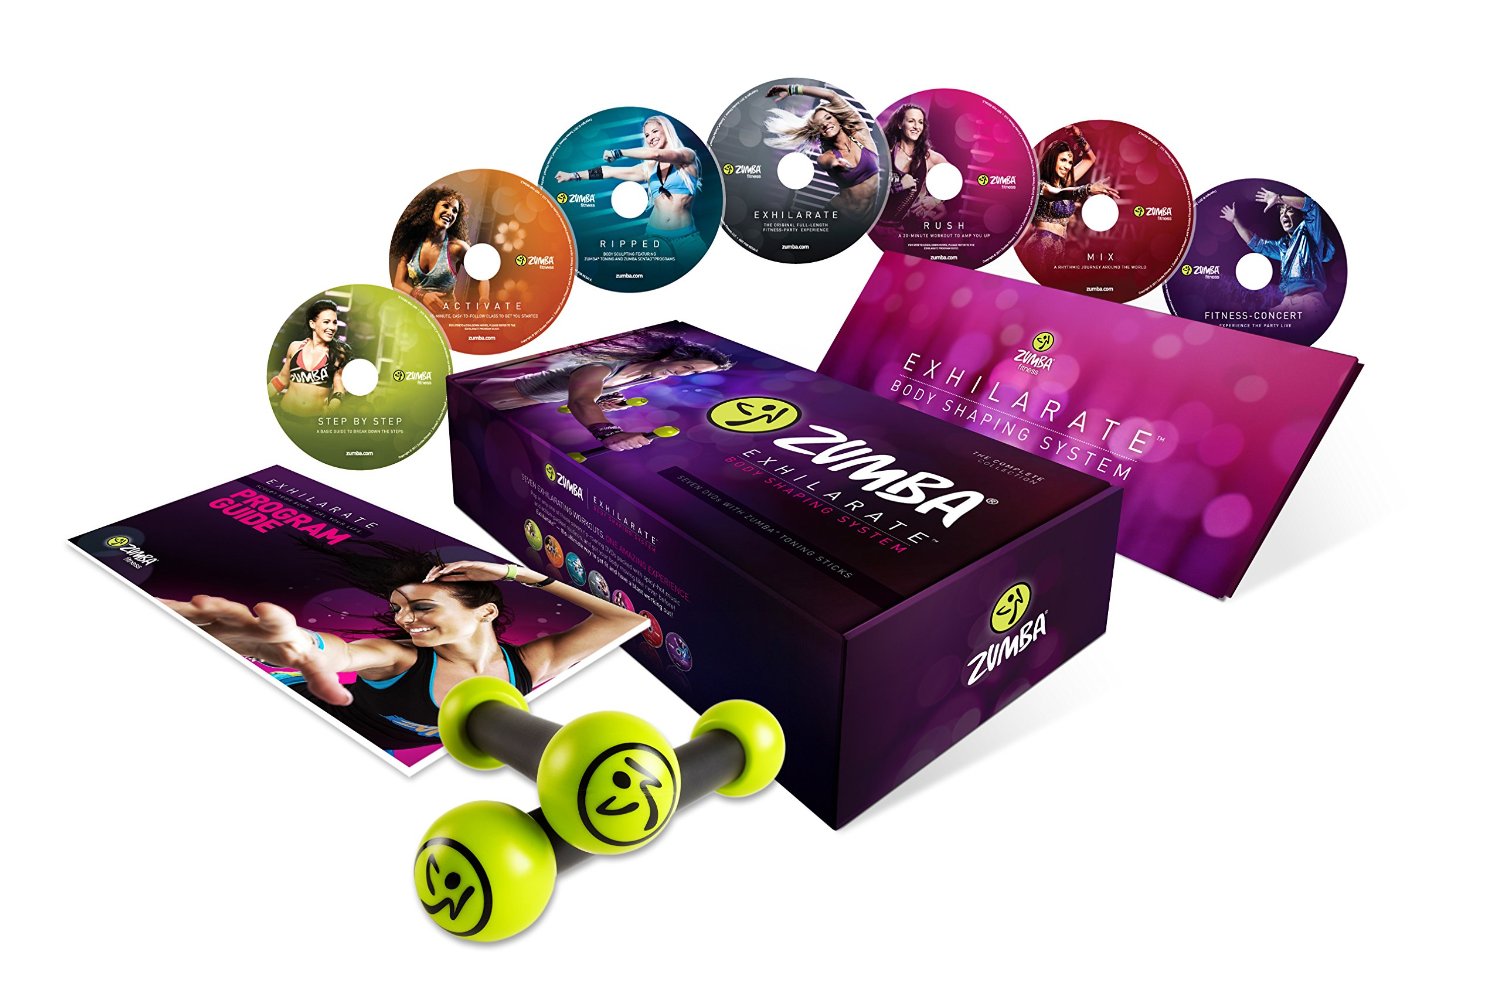 30 Minute Zumba workout dvd target for Push Pull Legs